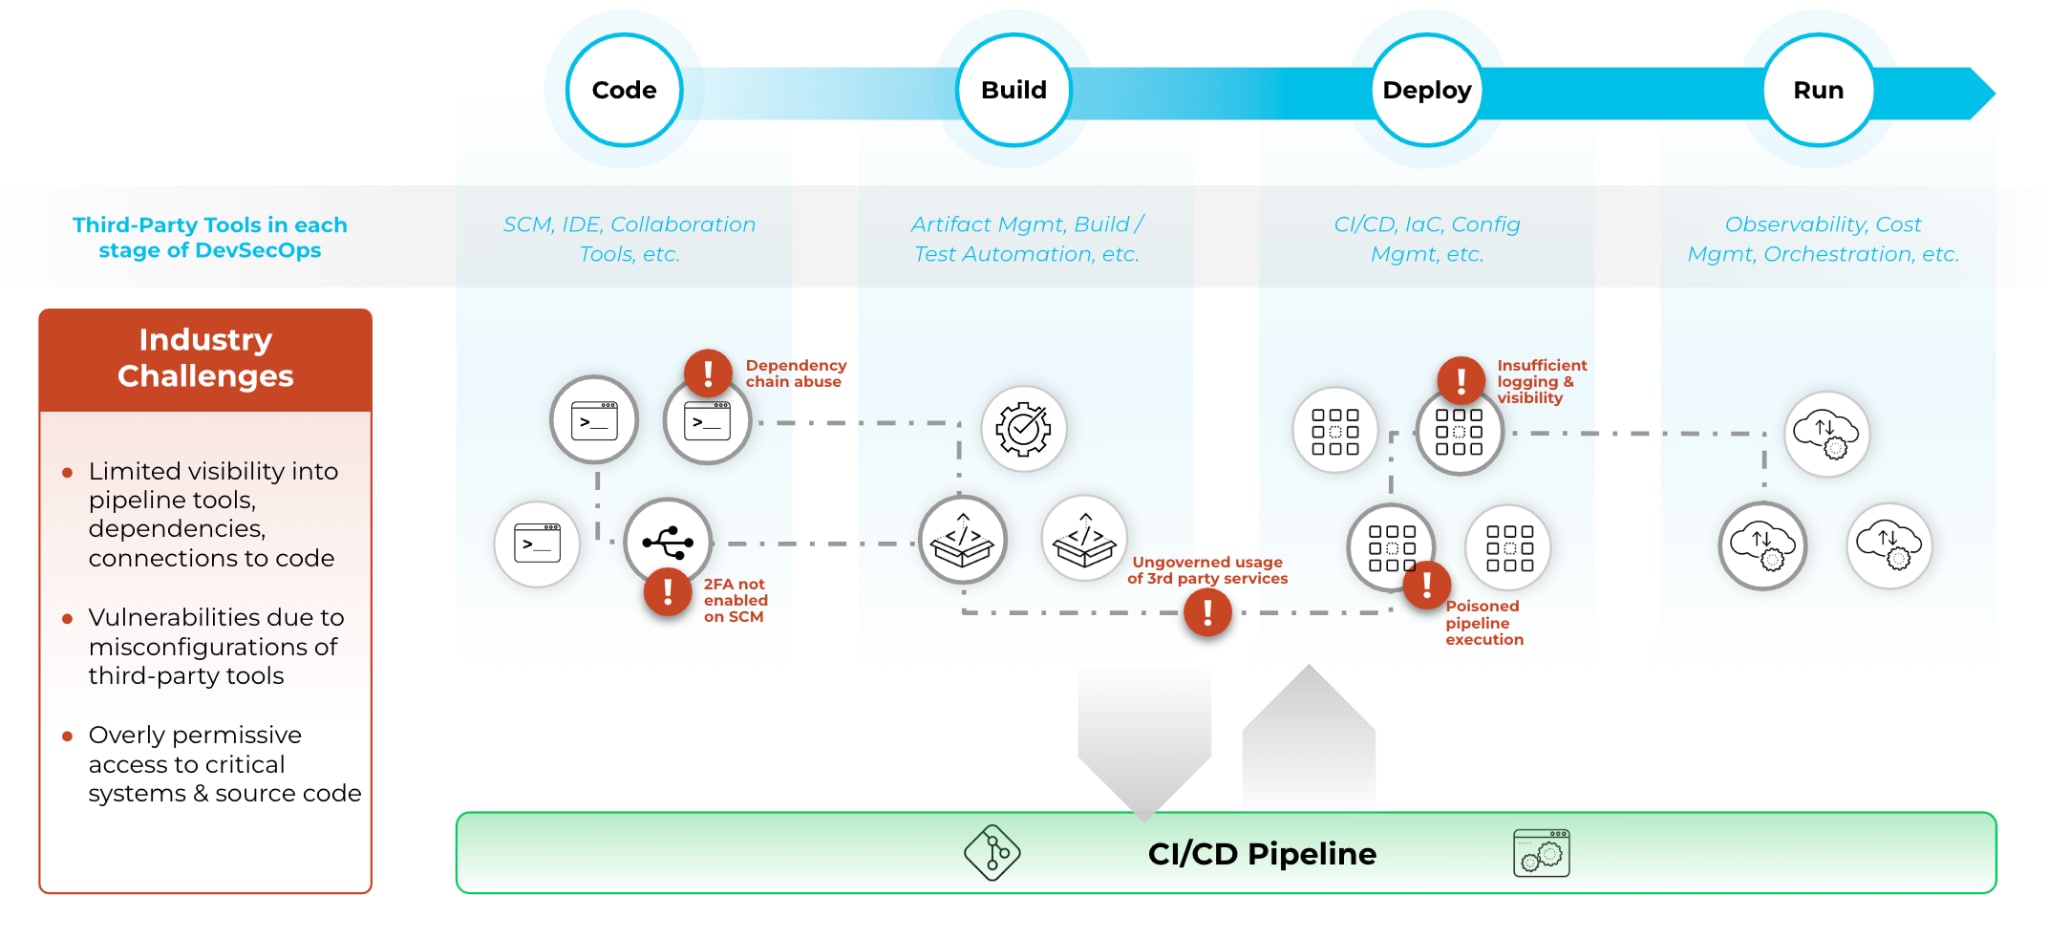 CI/CD Pipeline chart, showing code, build, deploy, and run flow.